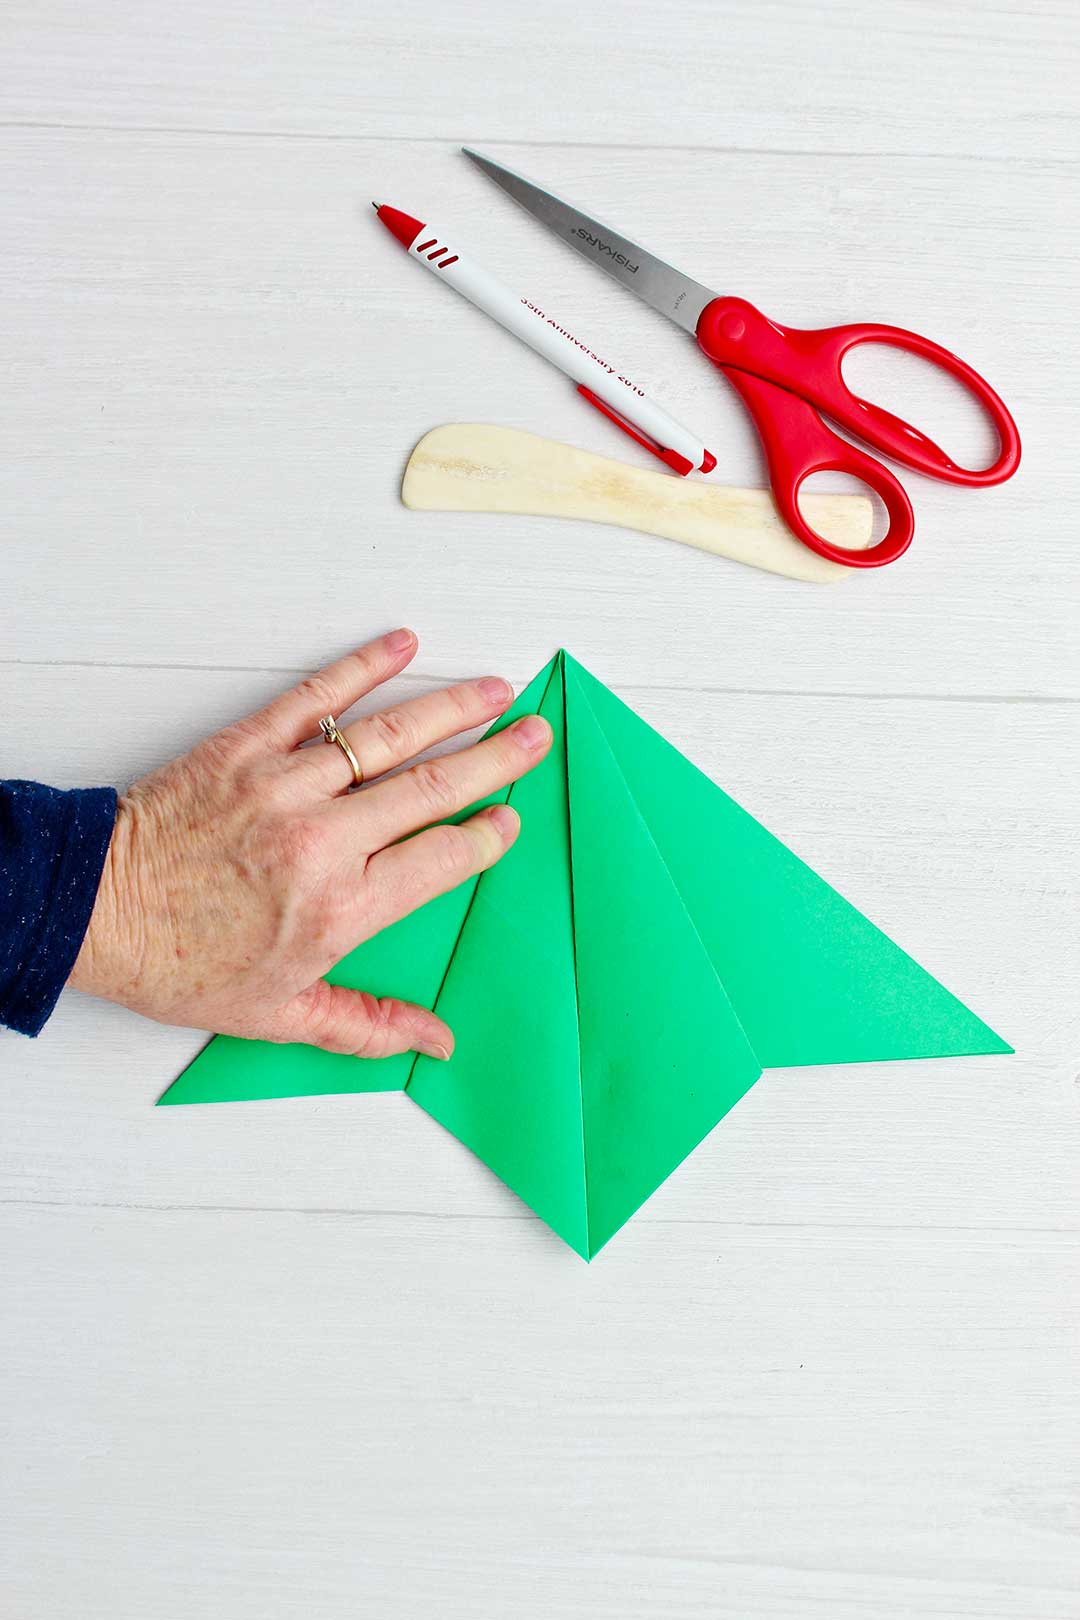 Hand holding down creased and folded pieces of the green origami tree with scissors, paper creaser and pen near by.